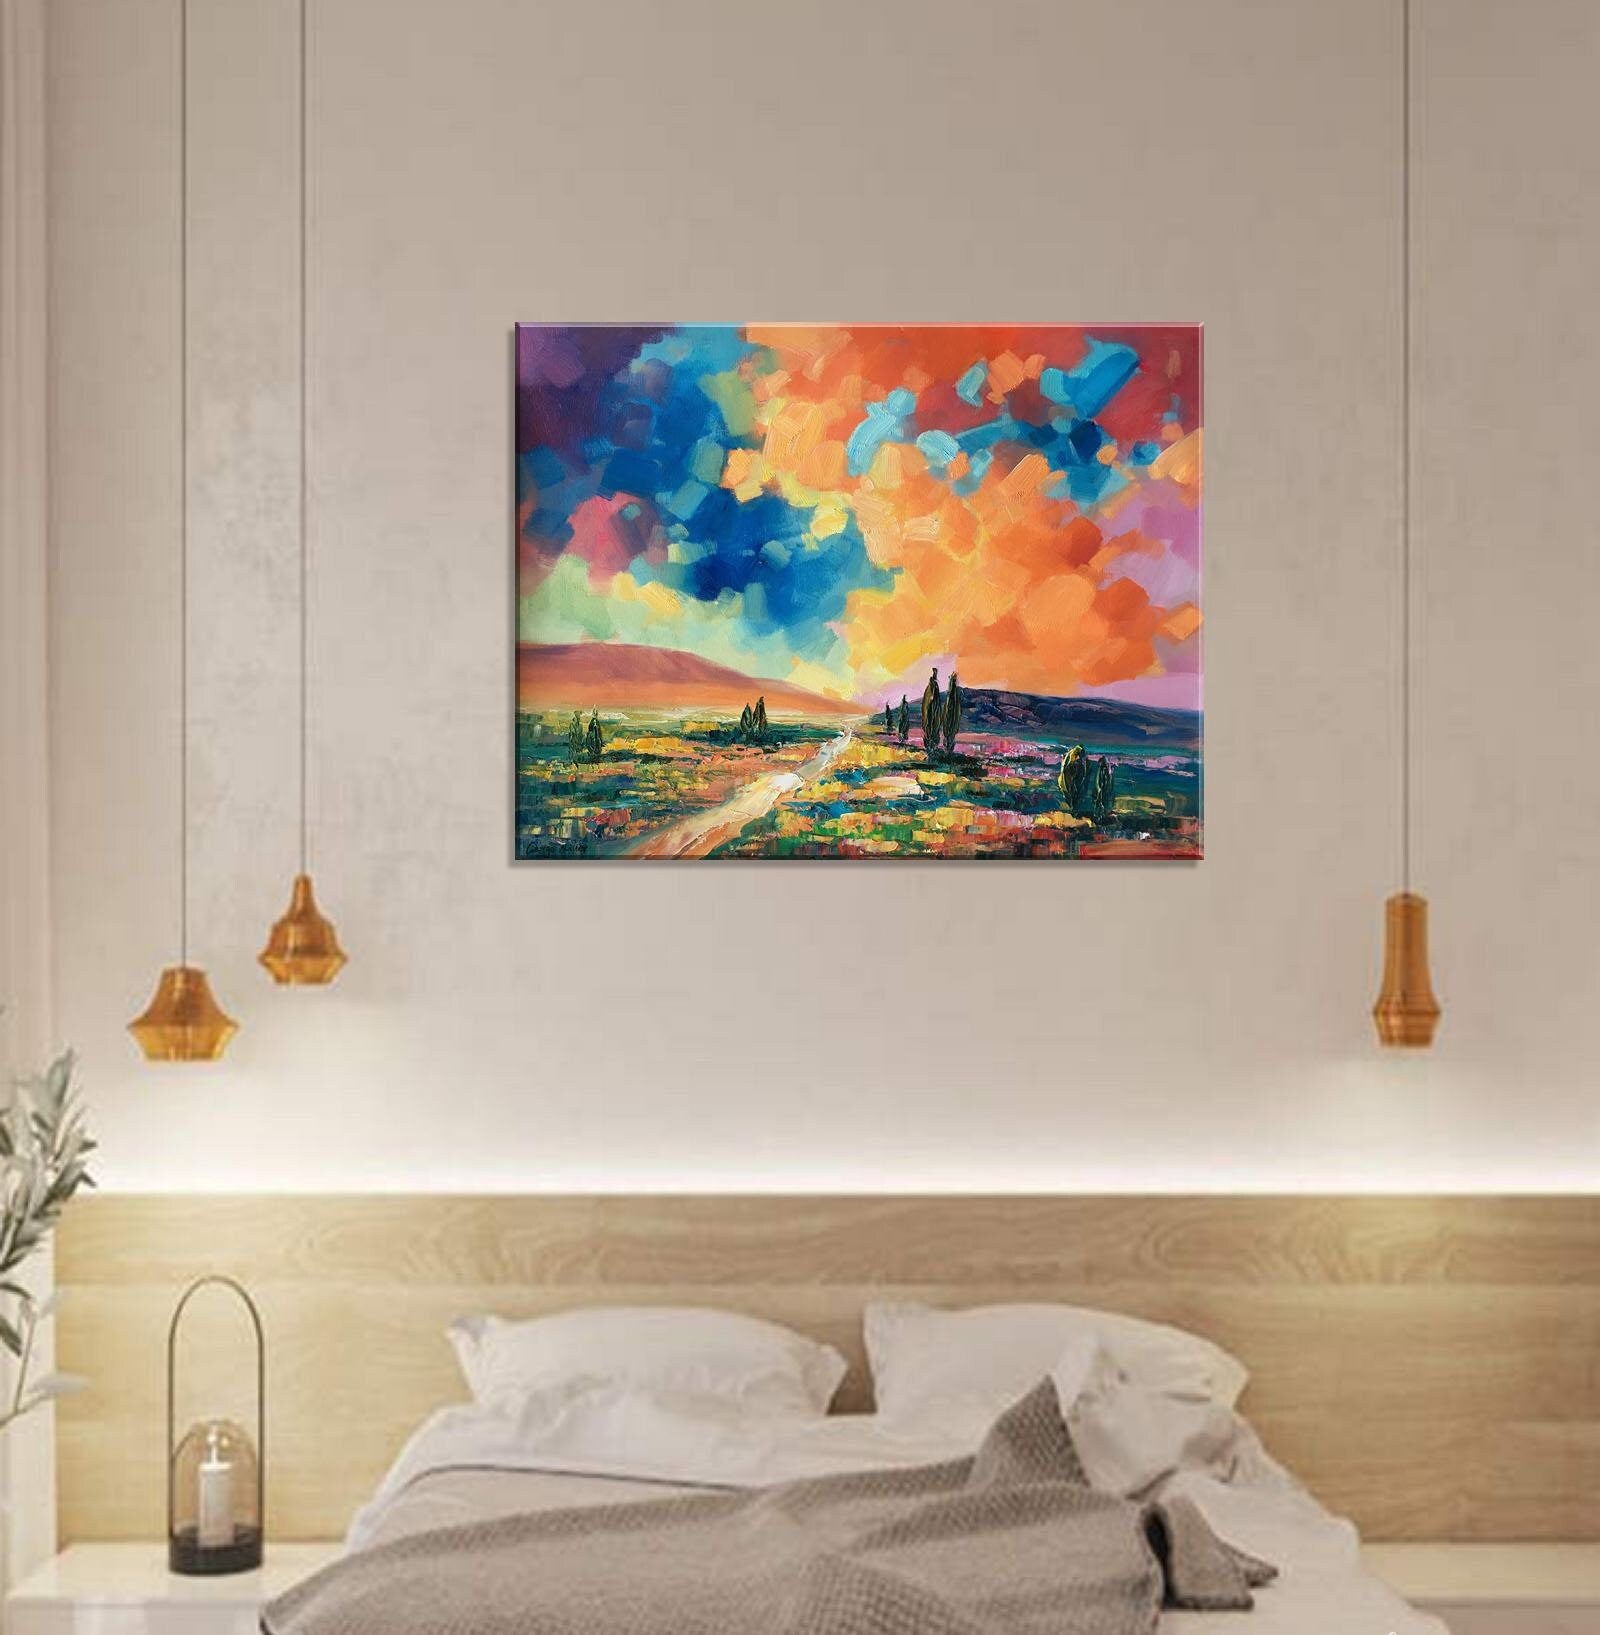 Original Landscape Oil Paintings: Large Abstract Art for Living Room | 32x40 inches - Large Abstract Painting, Canvas Wall Decor